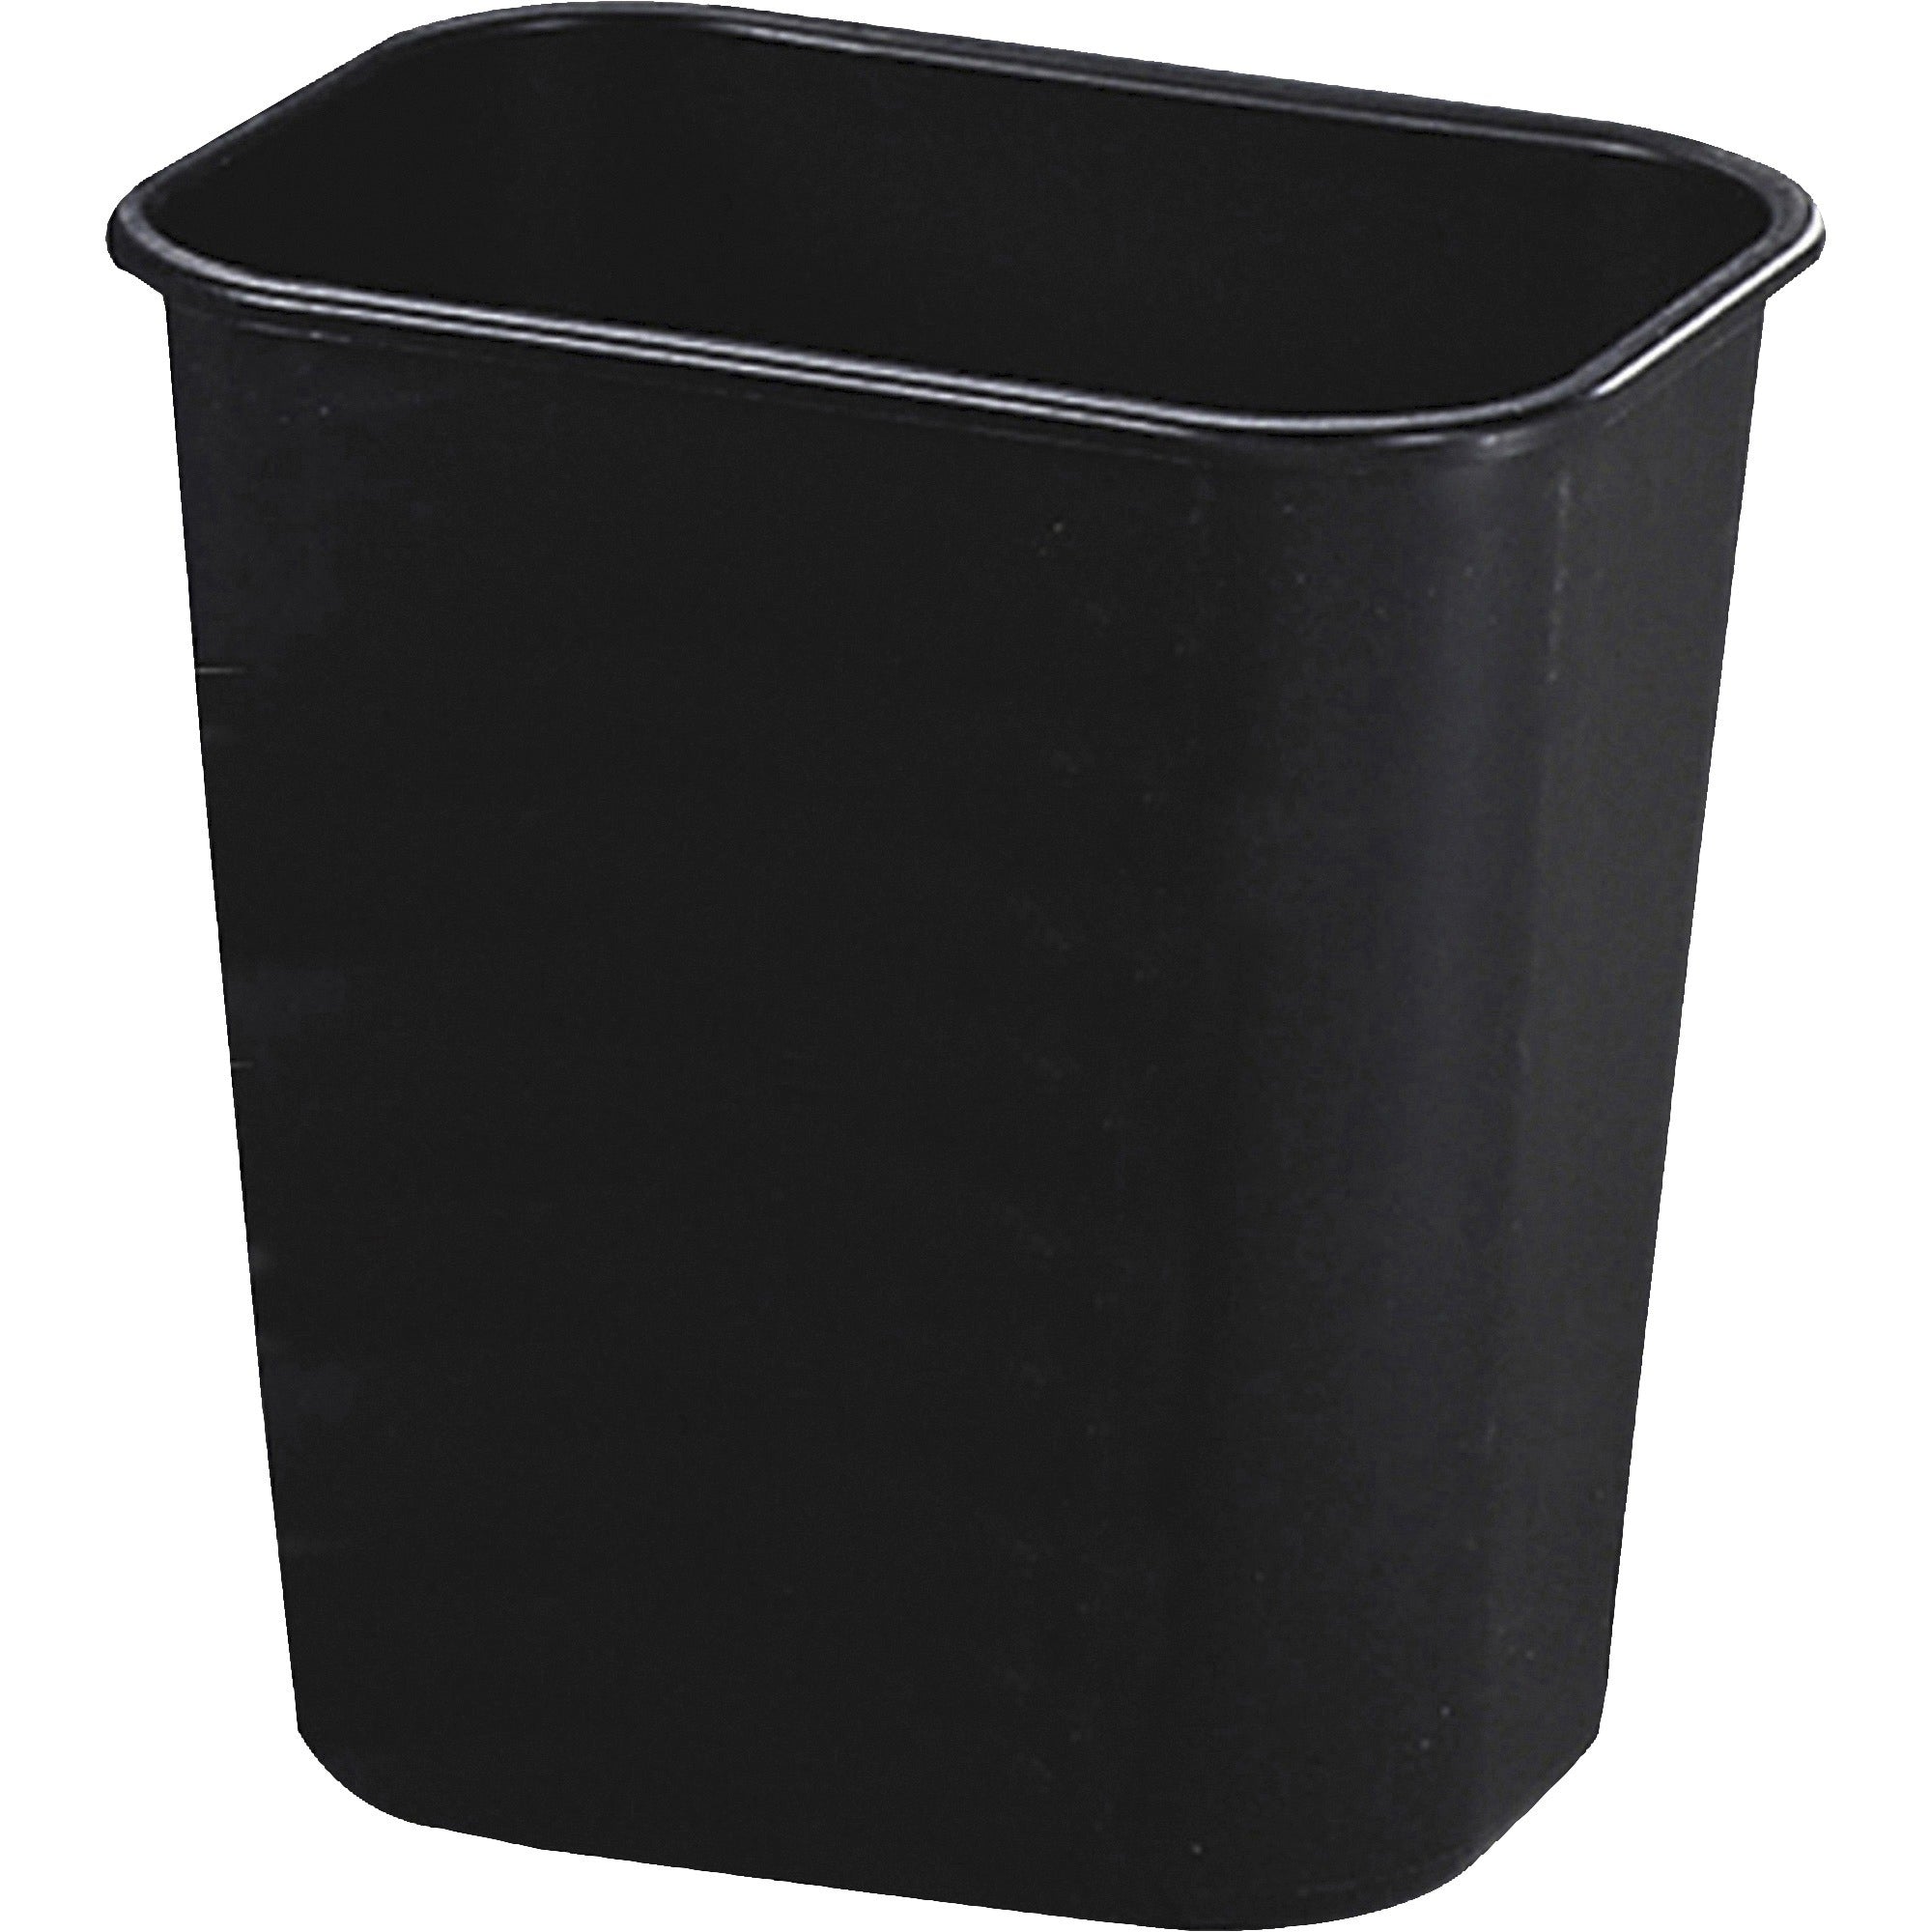 rubbermaid-commercial-13-qt-standard-deskside-wastebaskets-325-gal-capacity-rectangular-dent-resistant-rust-resistant-easy-to-clean-durable-121-height-x-83-width-x-114-depth-plastic-black-12-carton_rcp295500bkct - 1